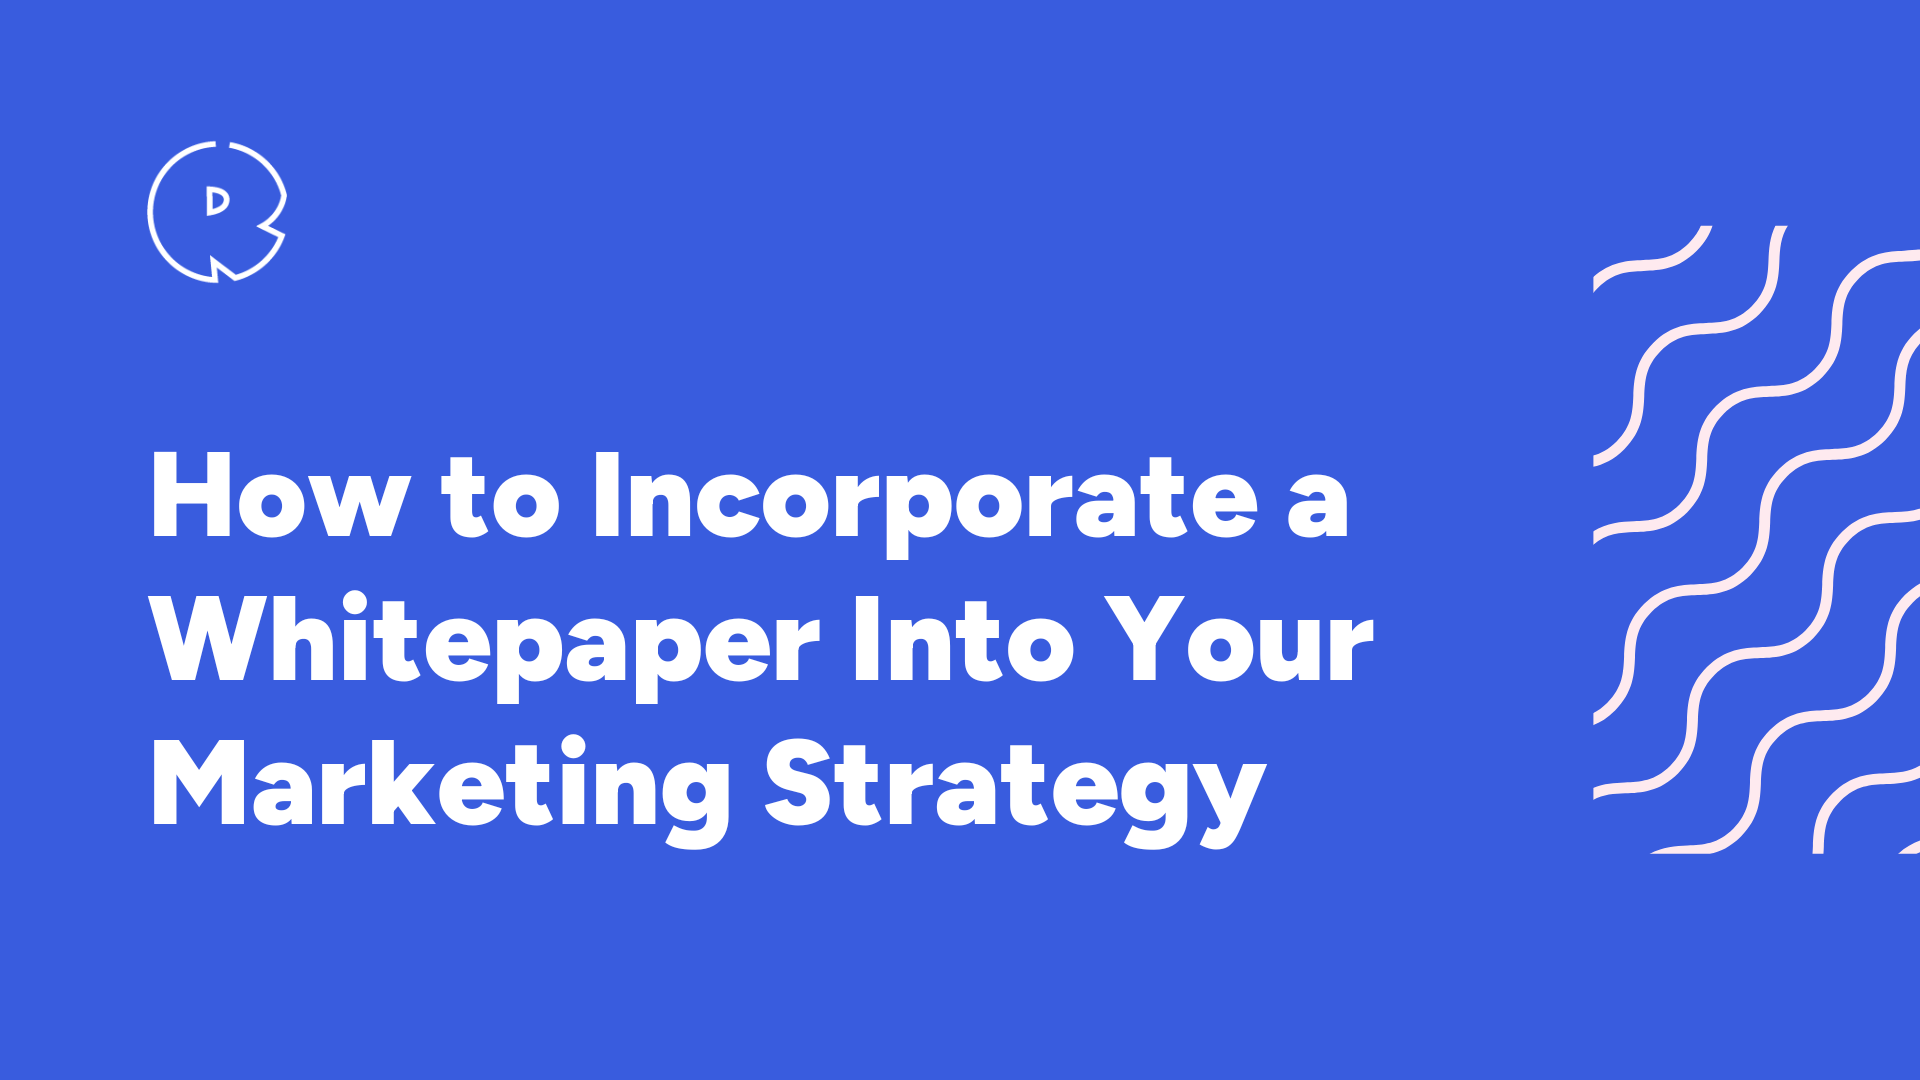 How to Incorporate a Whitepaper into Your Marketing Strategy